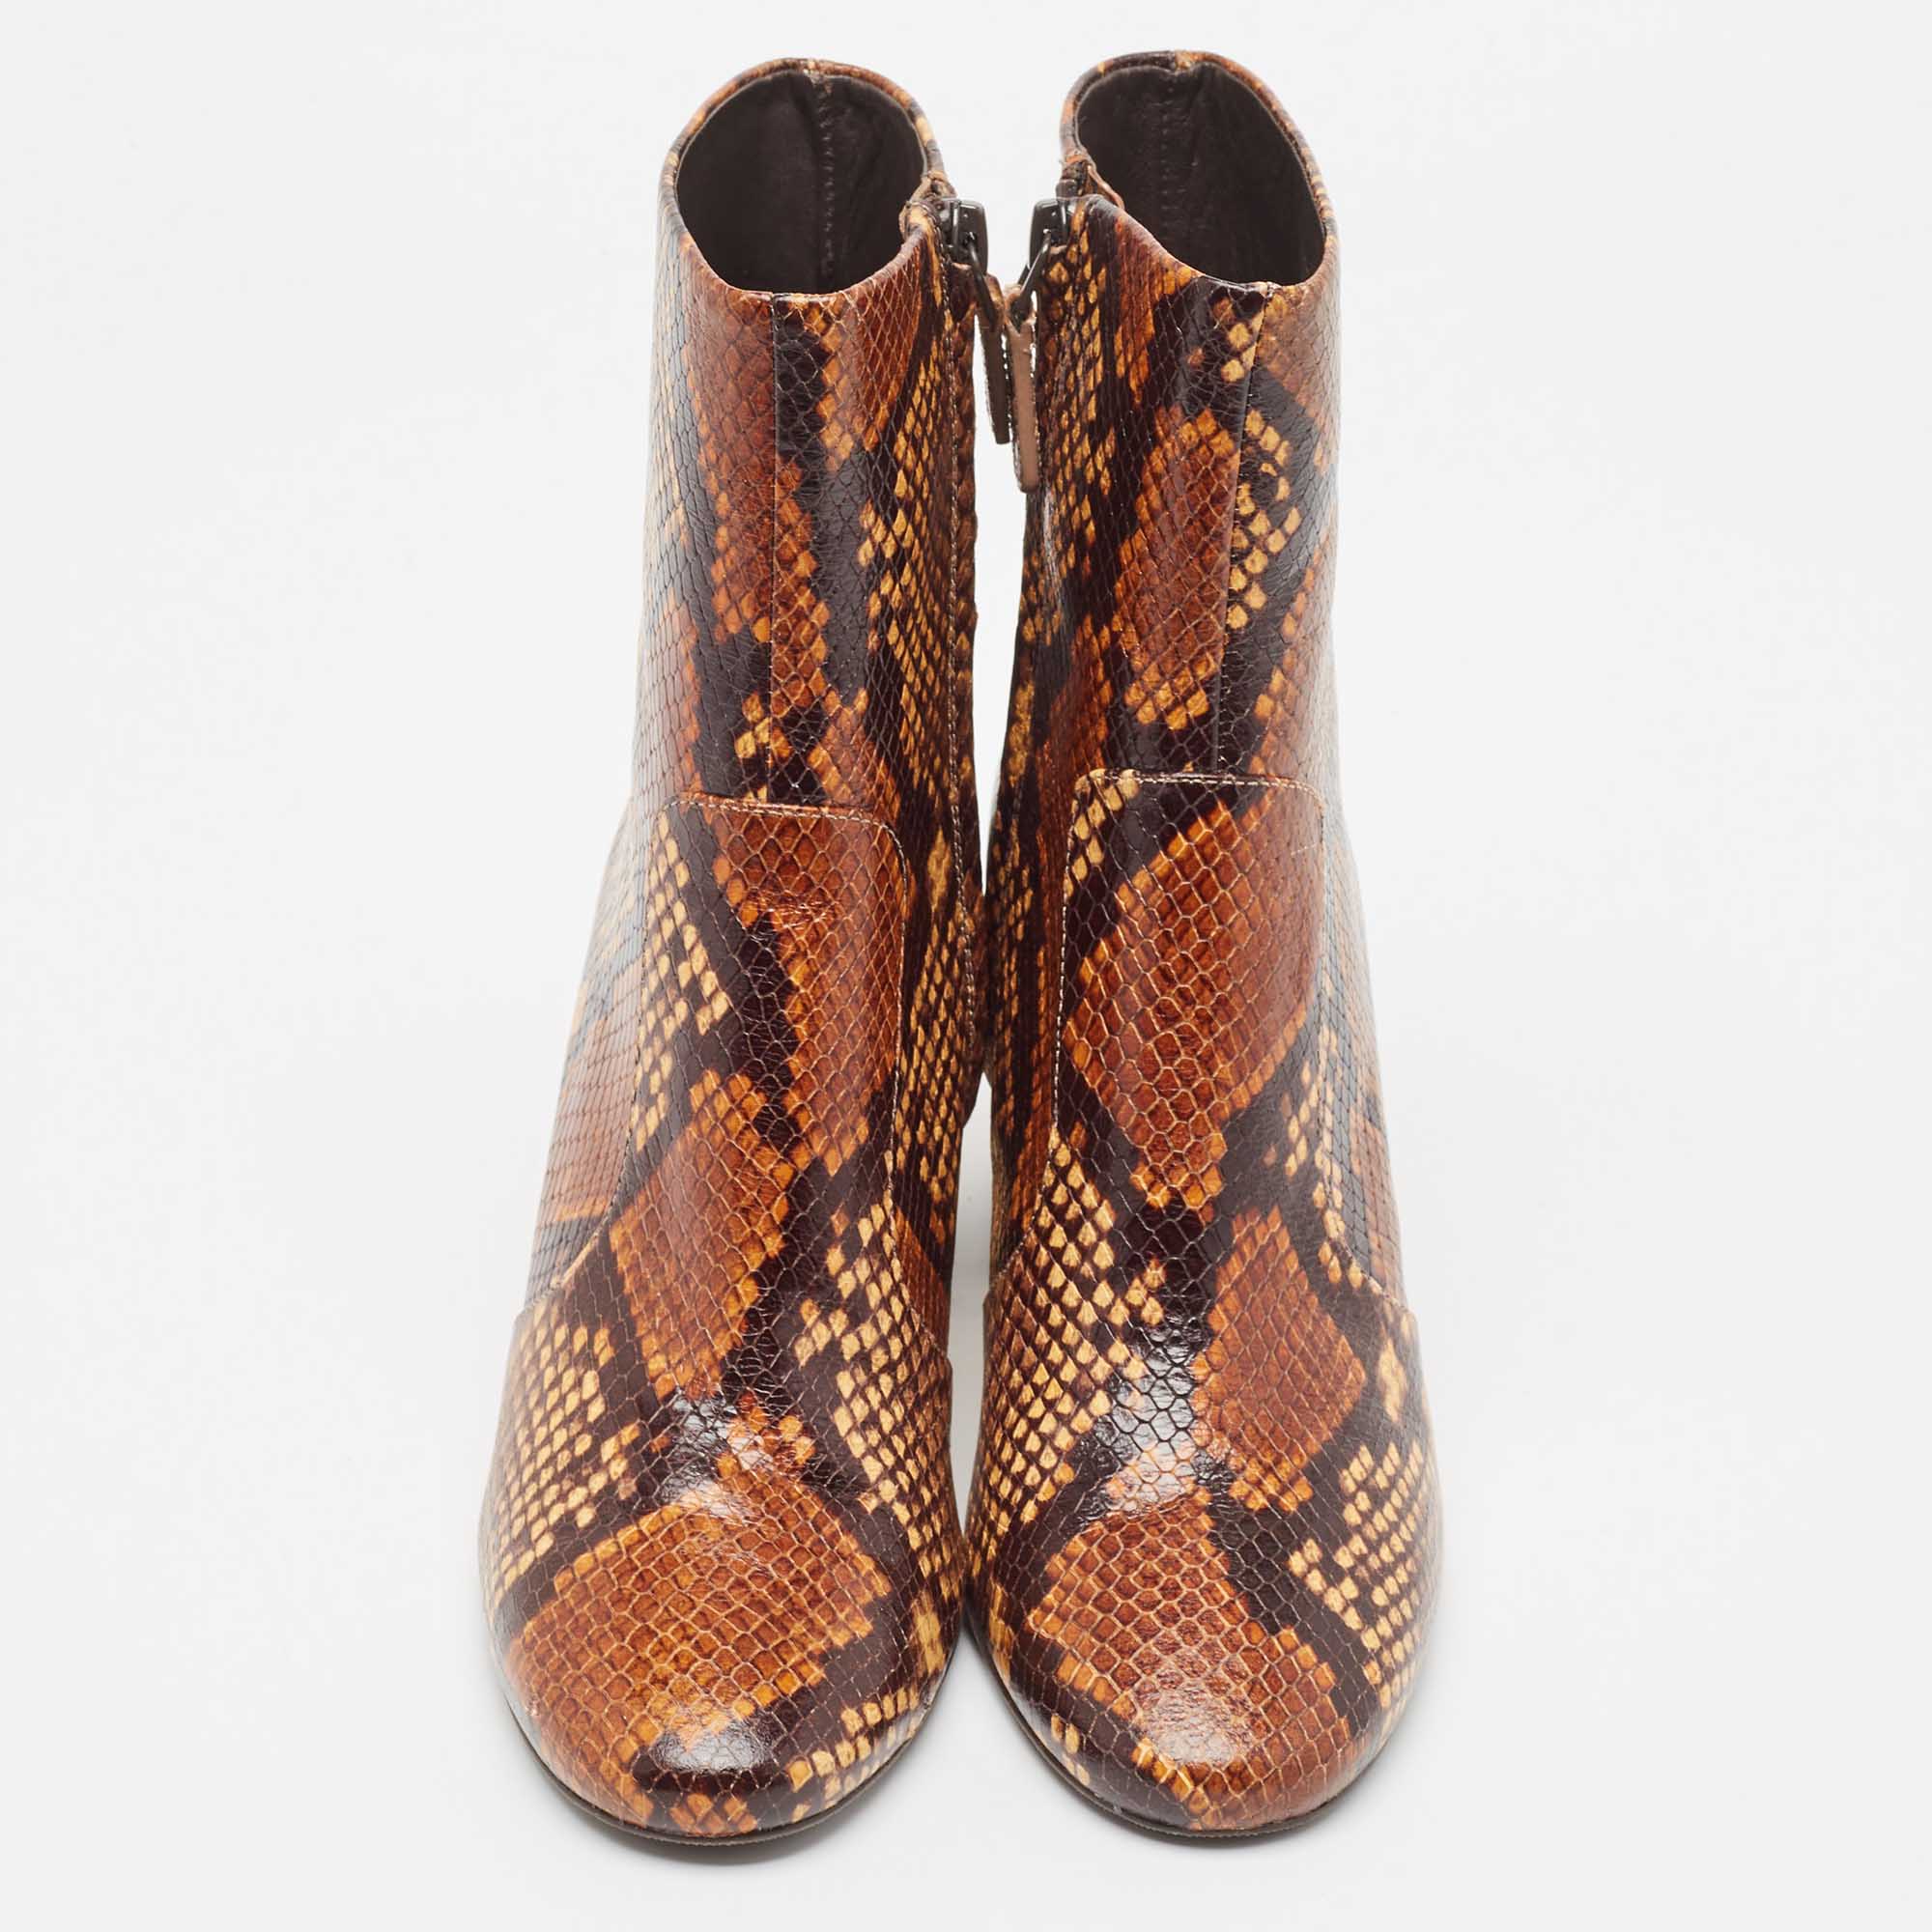 Tory Burch Brown Python Embossed Leather Ankle Boots Size 37.5